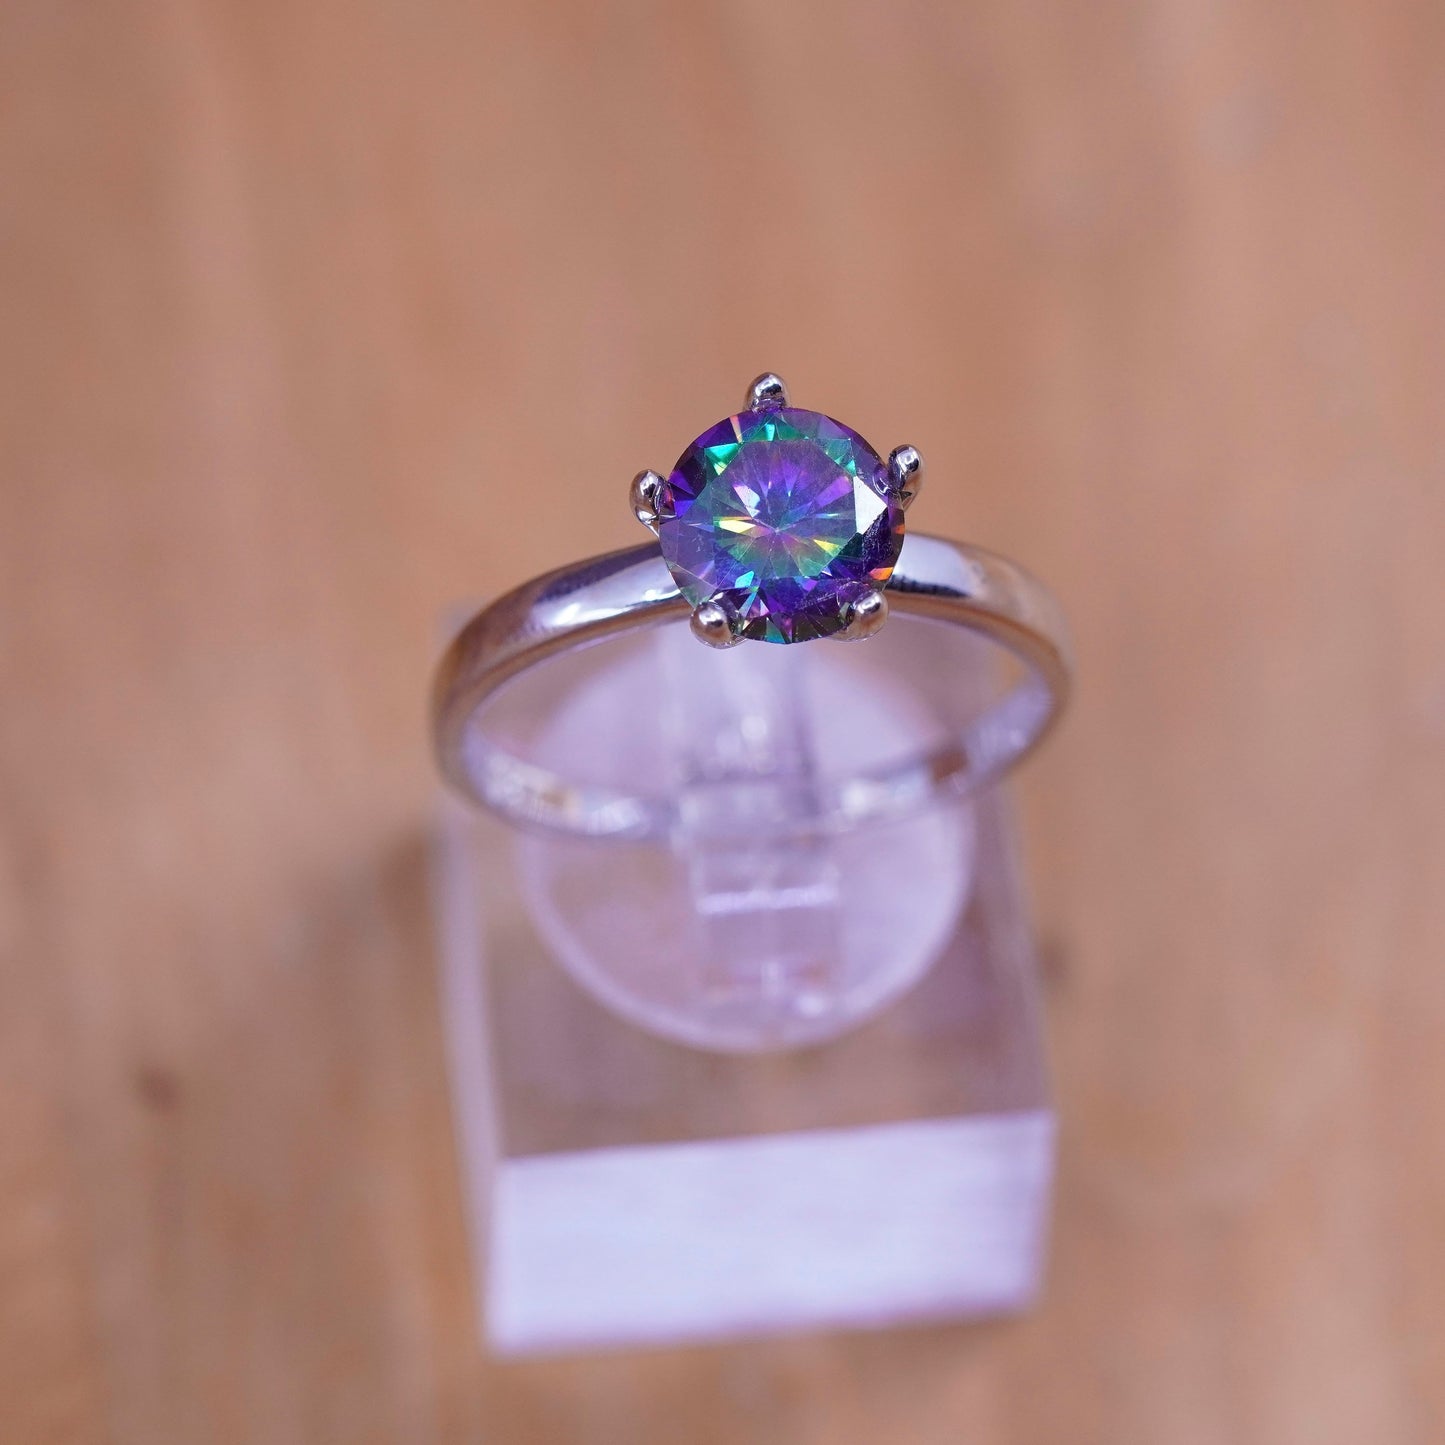 Size 9, vintage Sterling 925 silver engagement ring with rainbow topaz